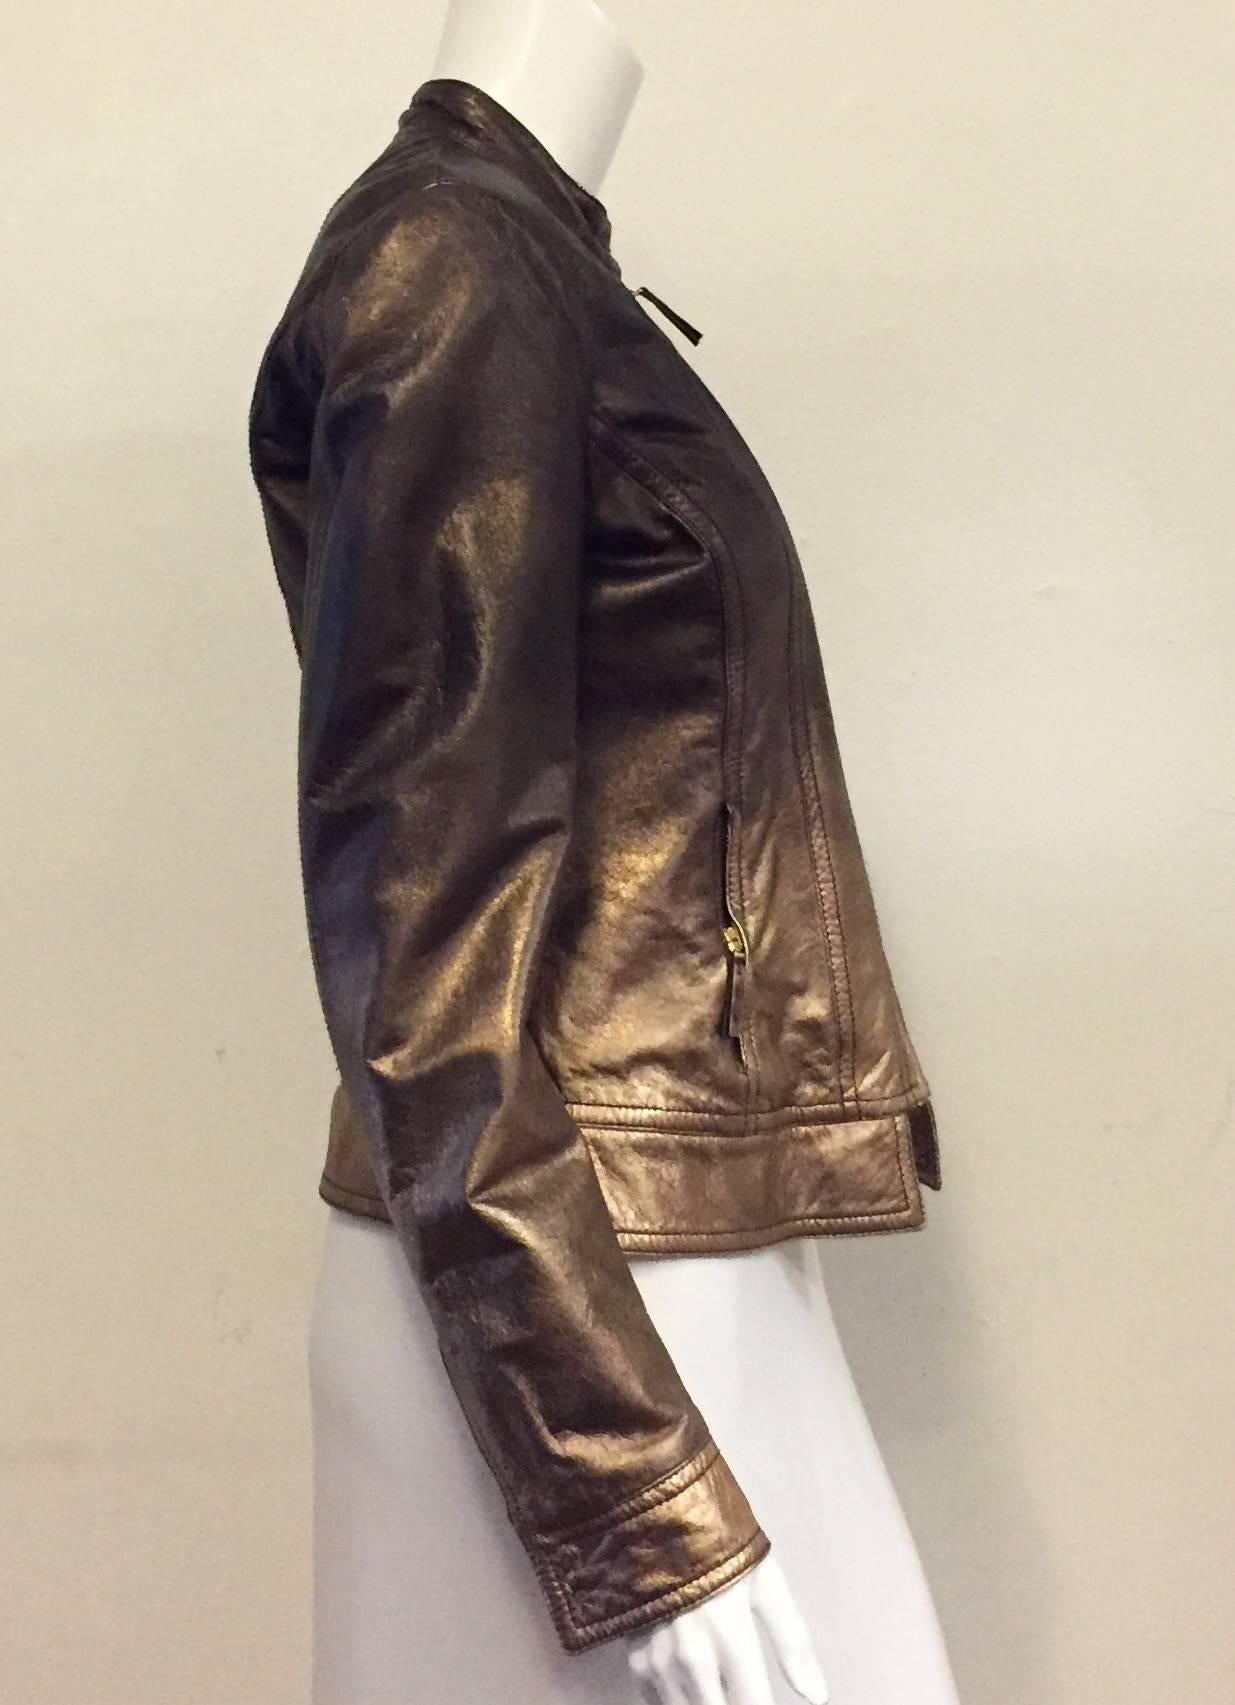 Recognizable Roberto Cavalli's signature design in this Leather jacket with Nehru collar and hidden snap closure.  As always, the difference is in the details, the delicately soft real leather in ombre shades of bronze to copper, with 2 front